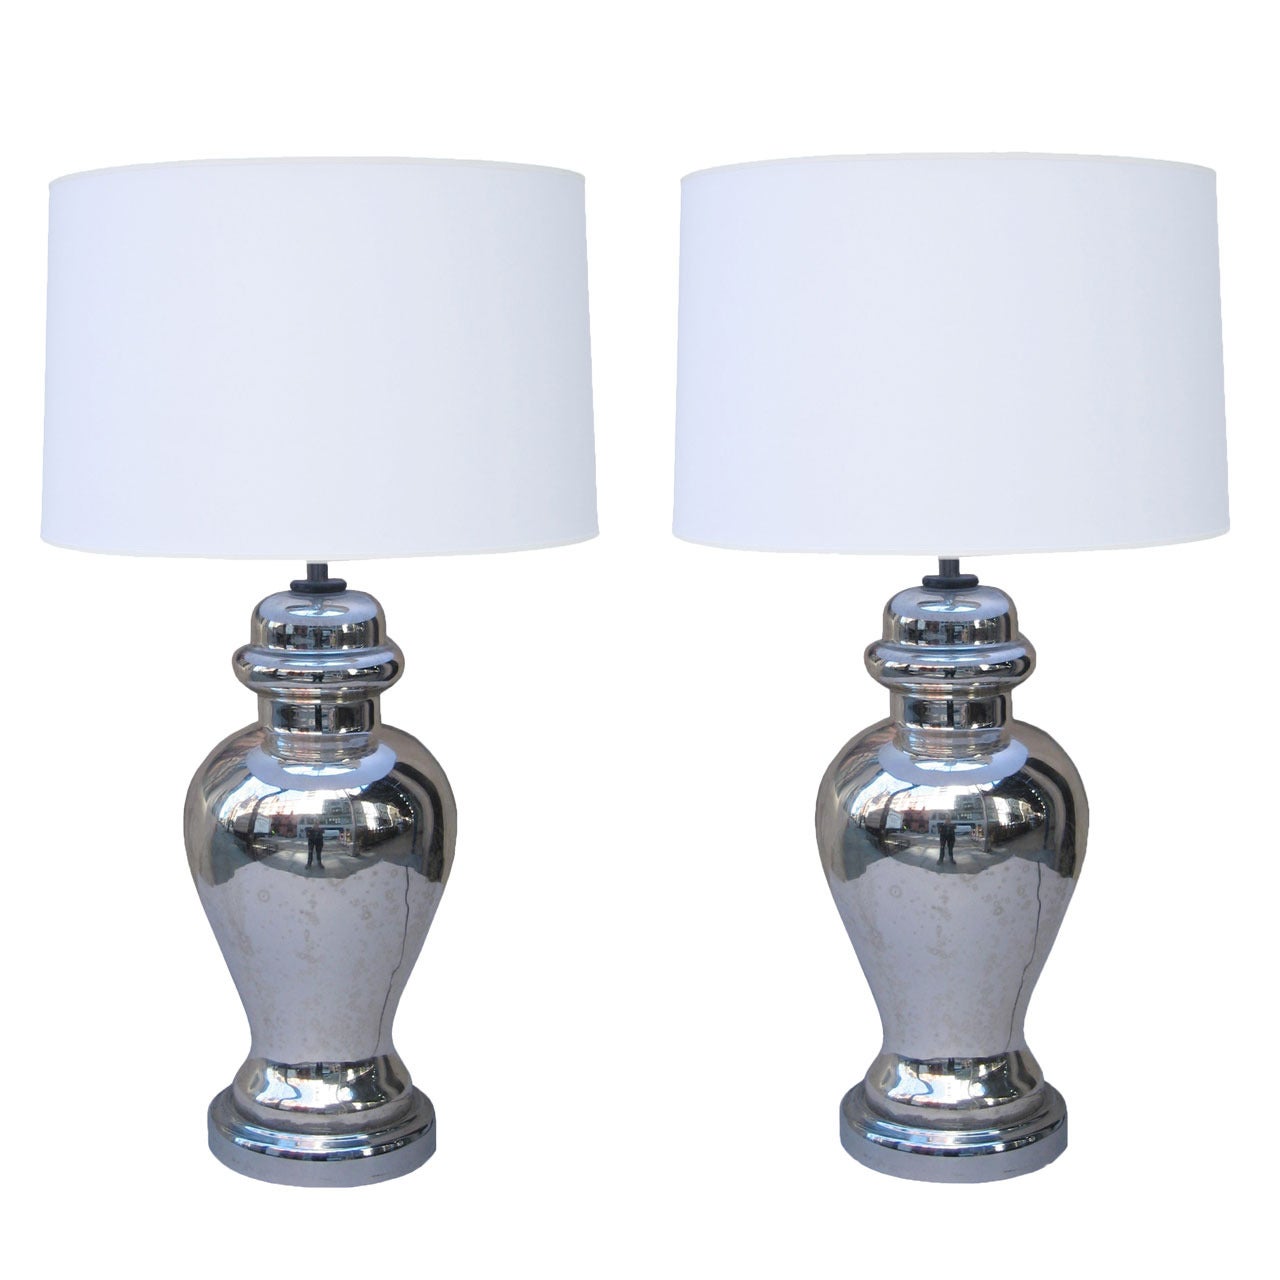 Fine Pair Of Mercury Urn-Shaped Table Lamps